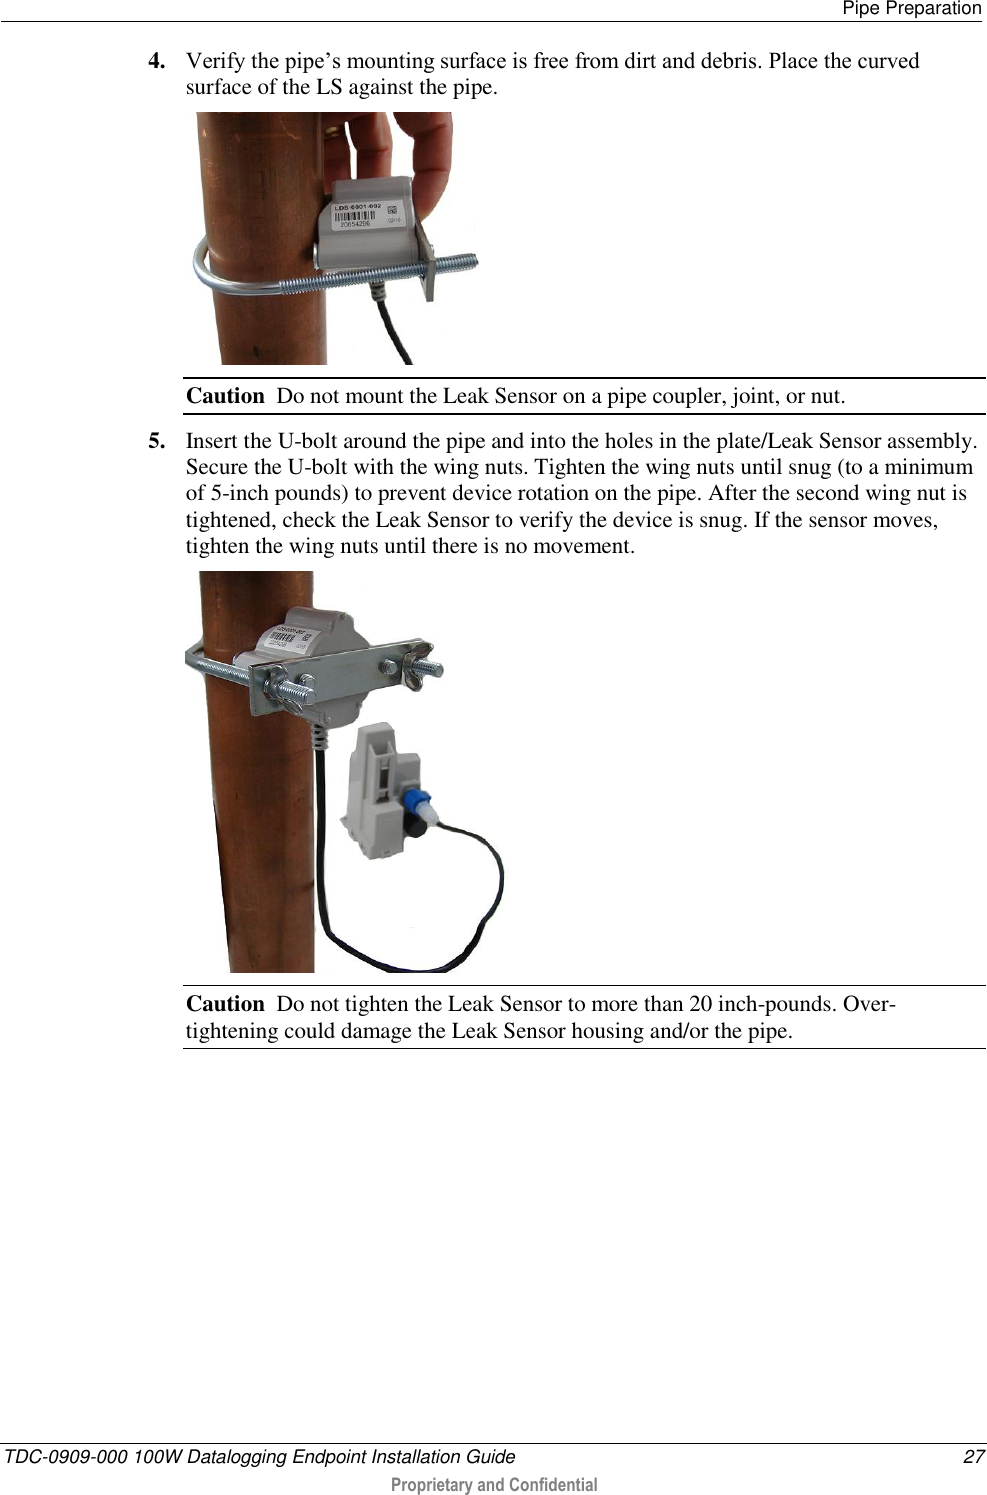   Pipe Preparation  TDC-0909-000 100W Datalogging Endpoint Installation Guide  27  Proprietary and Confidential  4. Verify the pipe’s mounting surface is free from dirt and debris. Place the curved surface of the LS against the pipe.   Caution  Do not mount the Leak Sensor on a pipe coupler, joint, or nut. 5. Insert the U-bolt around the pipe and into the holes in the plate/Leak Sensor assembly. Secure the U-bolt with the wing nuts. Tighten the wing nuts until snug (to a minimum of 5-inch pounds) to prevent device rotation on the pipe. After the second wing nut is tightened, check the Leak Sensor to verify the device is snug. If the sensor moves, tighten the wing nuts until there is no movement.   Caution  Do not tighten the Leak Sensor to more than 20 inch-pounds. Over-tightening could damage the Leak Sensor housing and/or the pipe.          